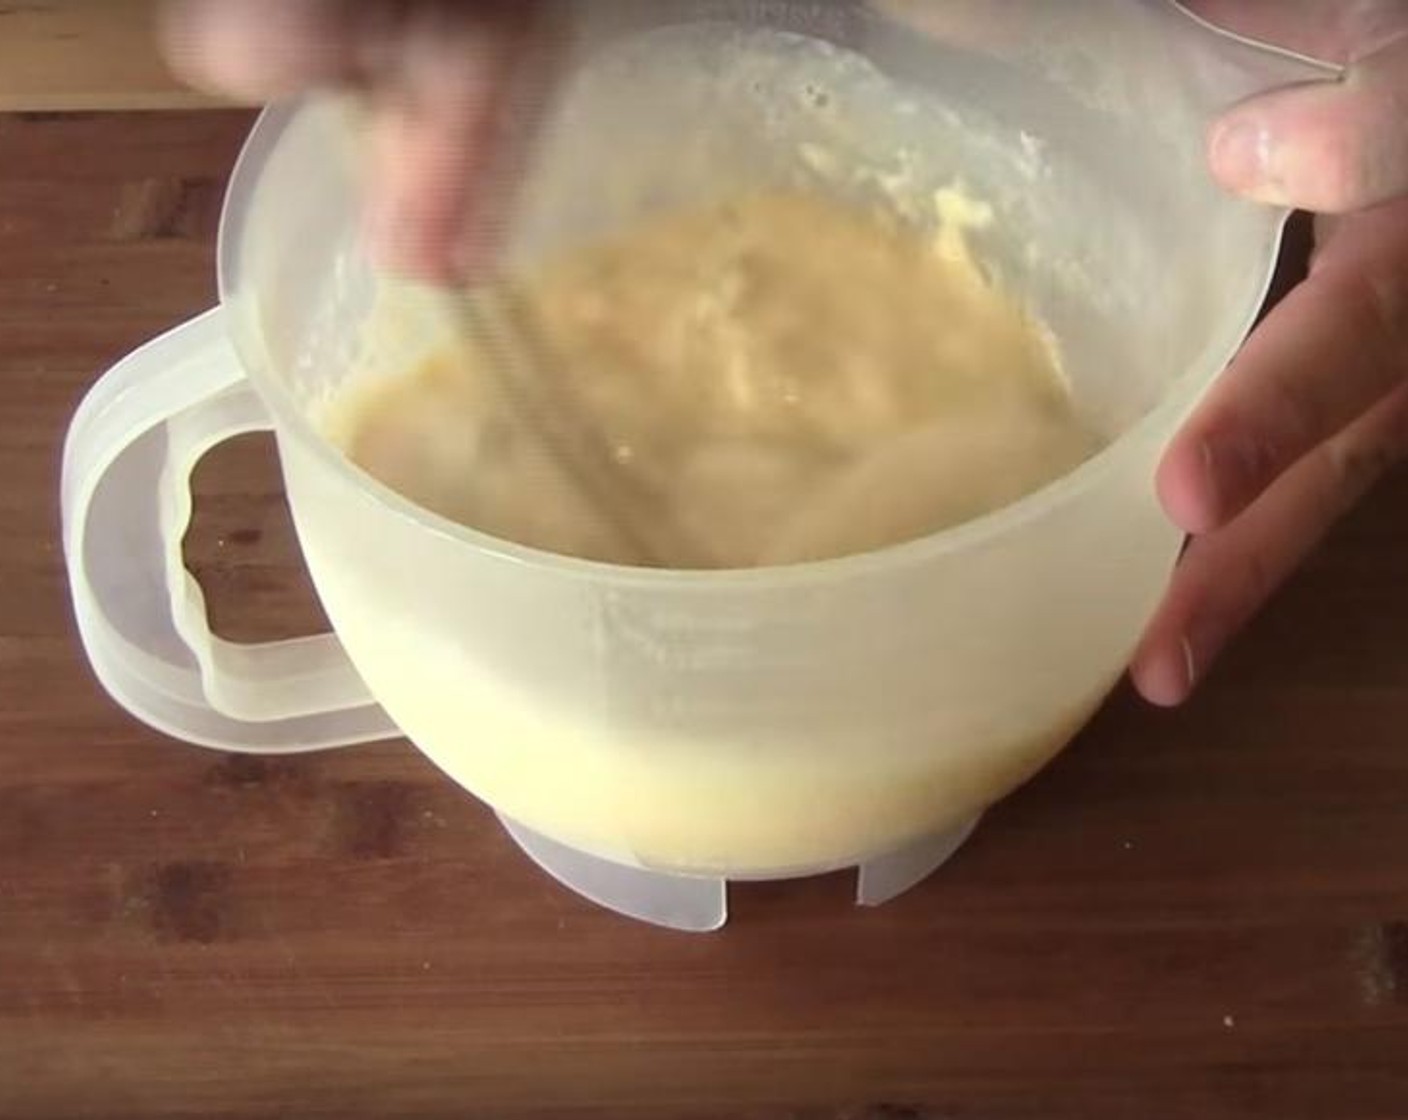 step 4 In another jug, put Milk (1 1/2 cups) and Eggs (2). Whisk them together. Mix the wet and dry ingredients together.